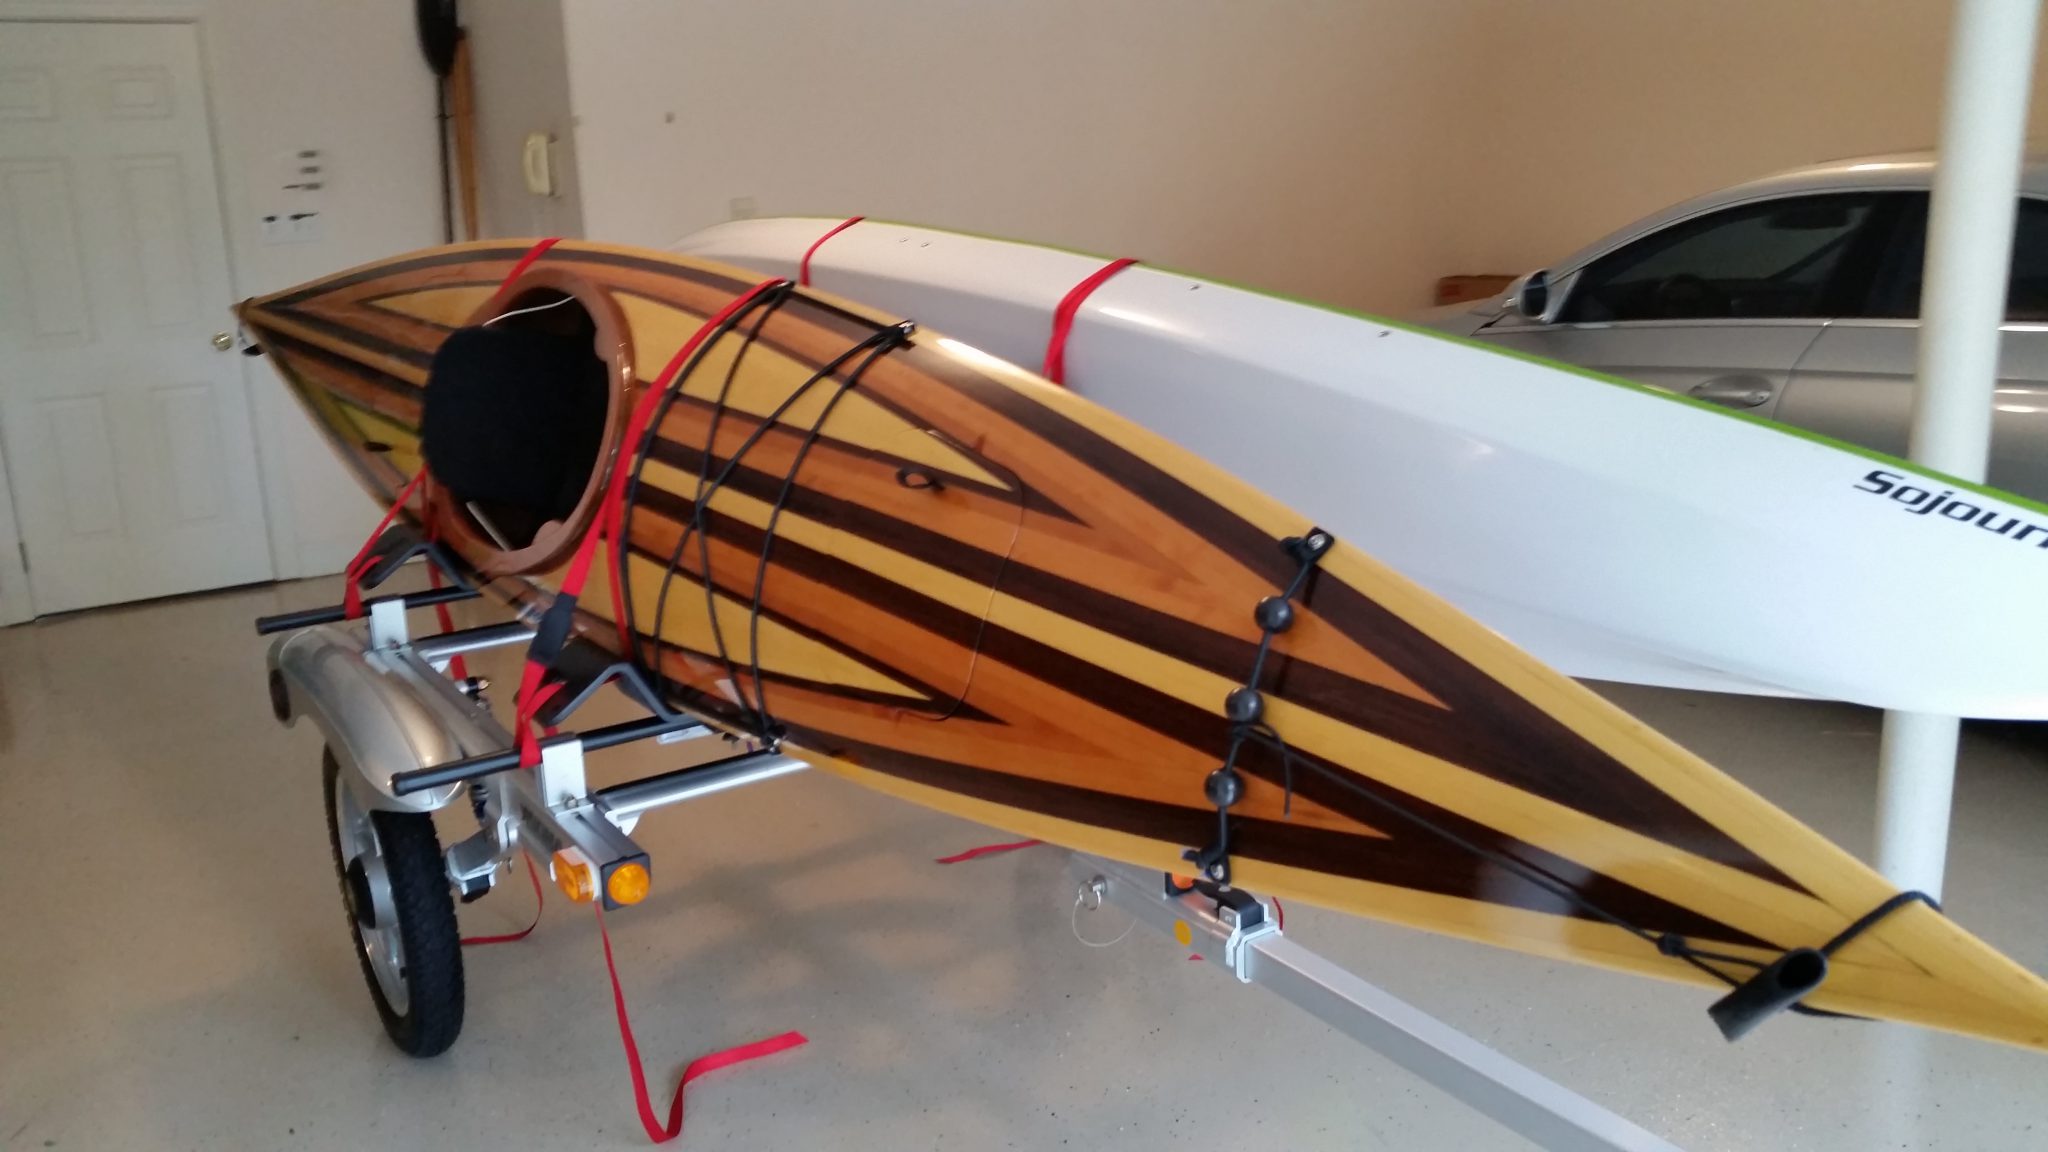 Kayak with multiple types of wood